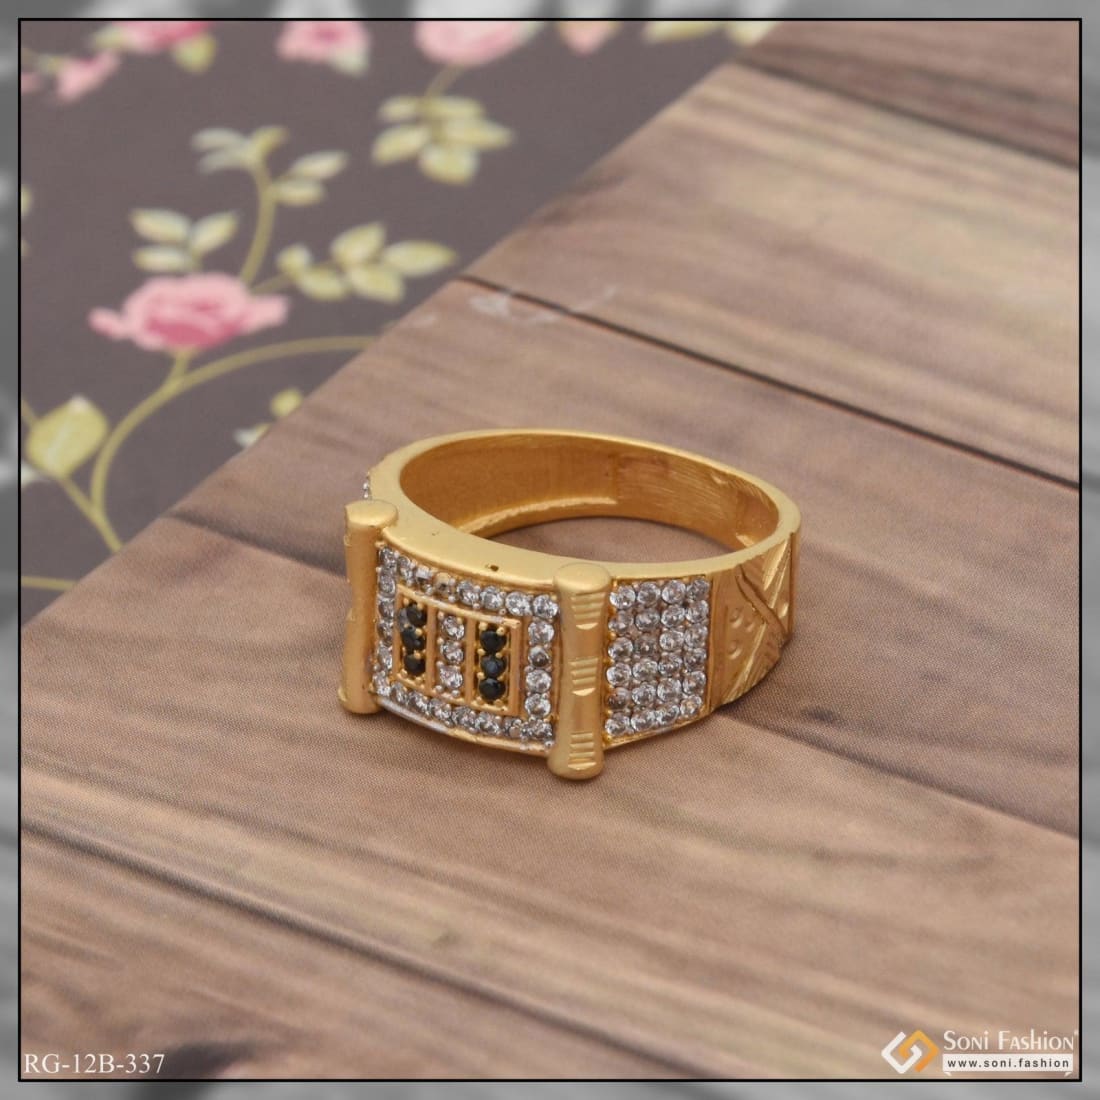 Polished Gold Gents Ring, Gender : Male, Occasion : Daily Use, Gift,  Wedding at Best Price in Mumbai